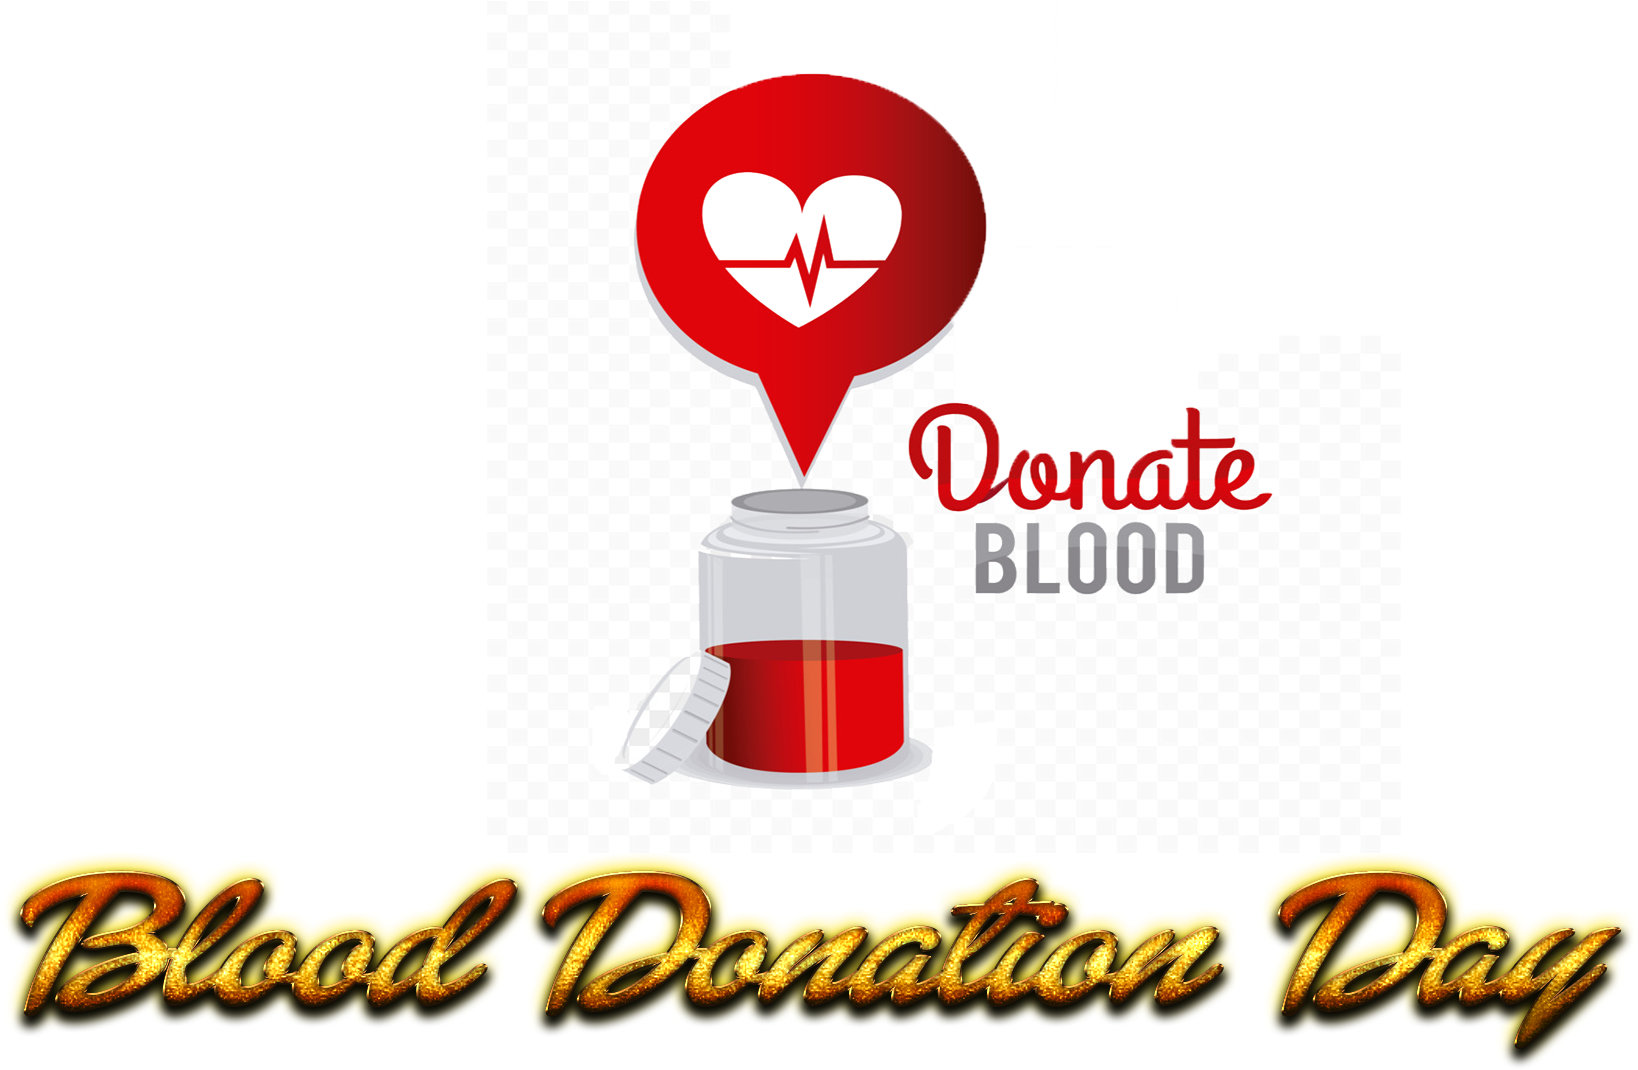 Blood Donation Day Transparent Png Image - Portable Network Graphics (1920x1200)